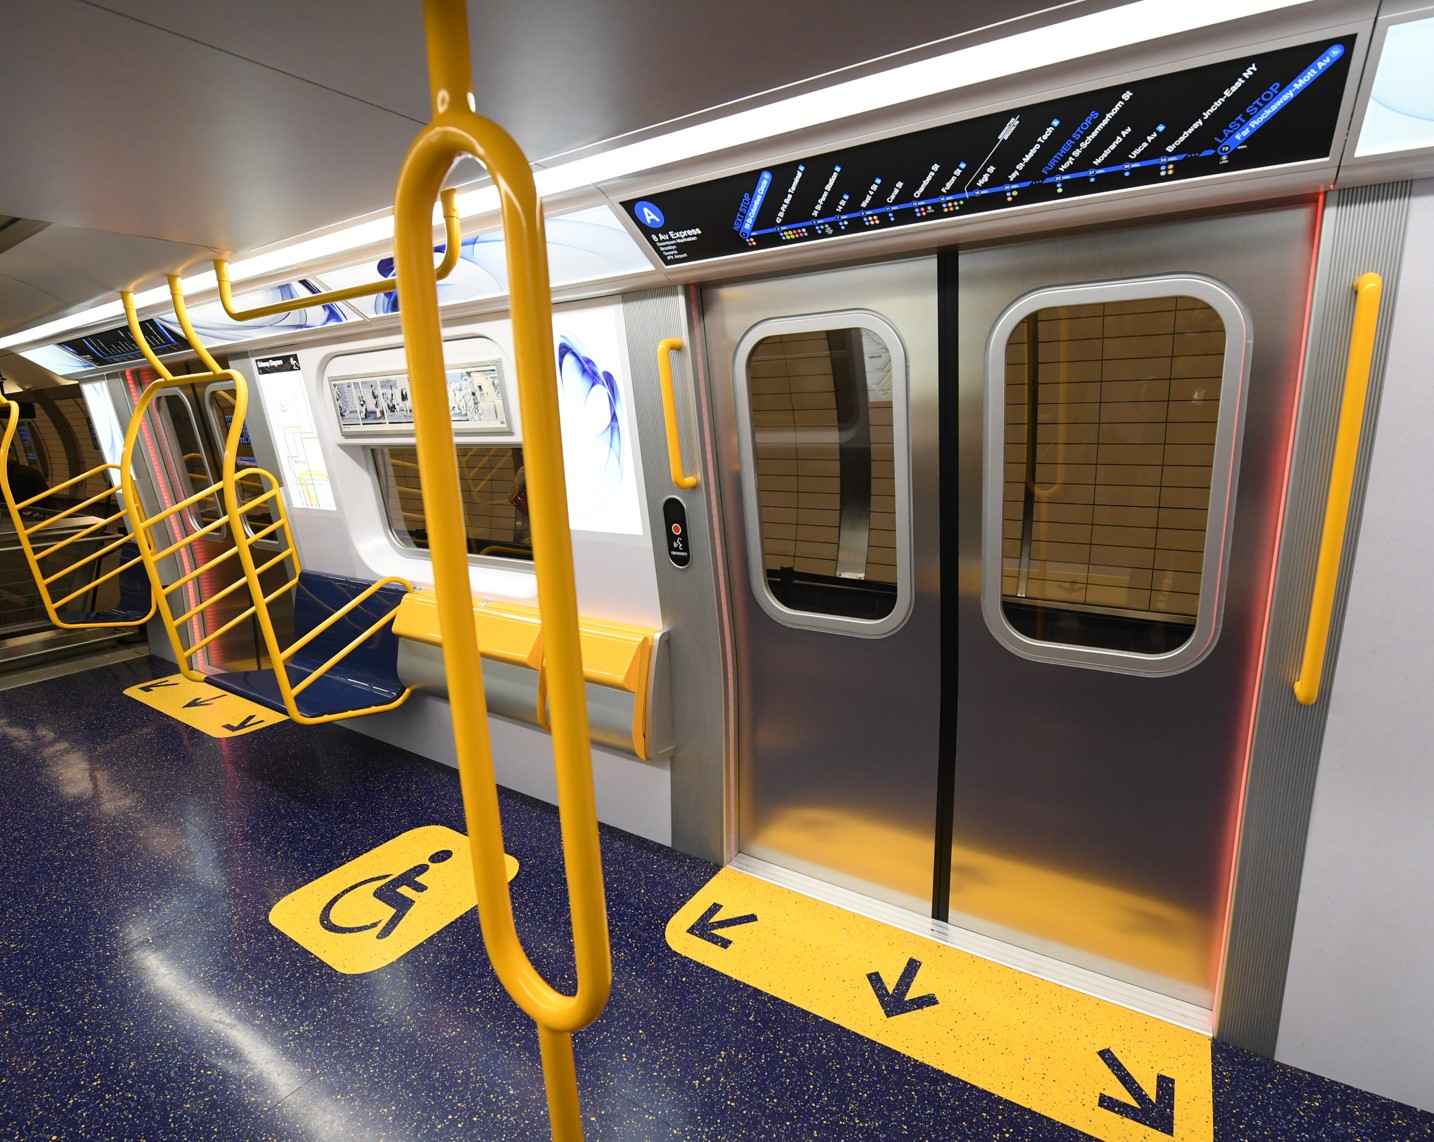 Interior of R211 train with handicap sign and other accessibility features